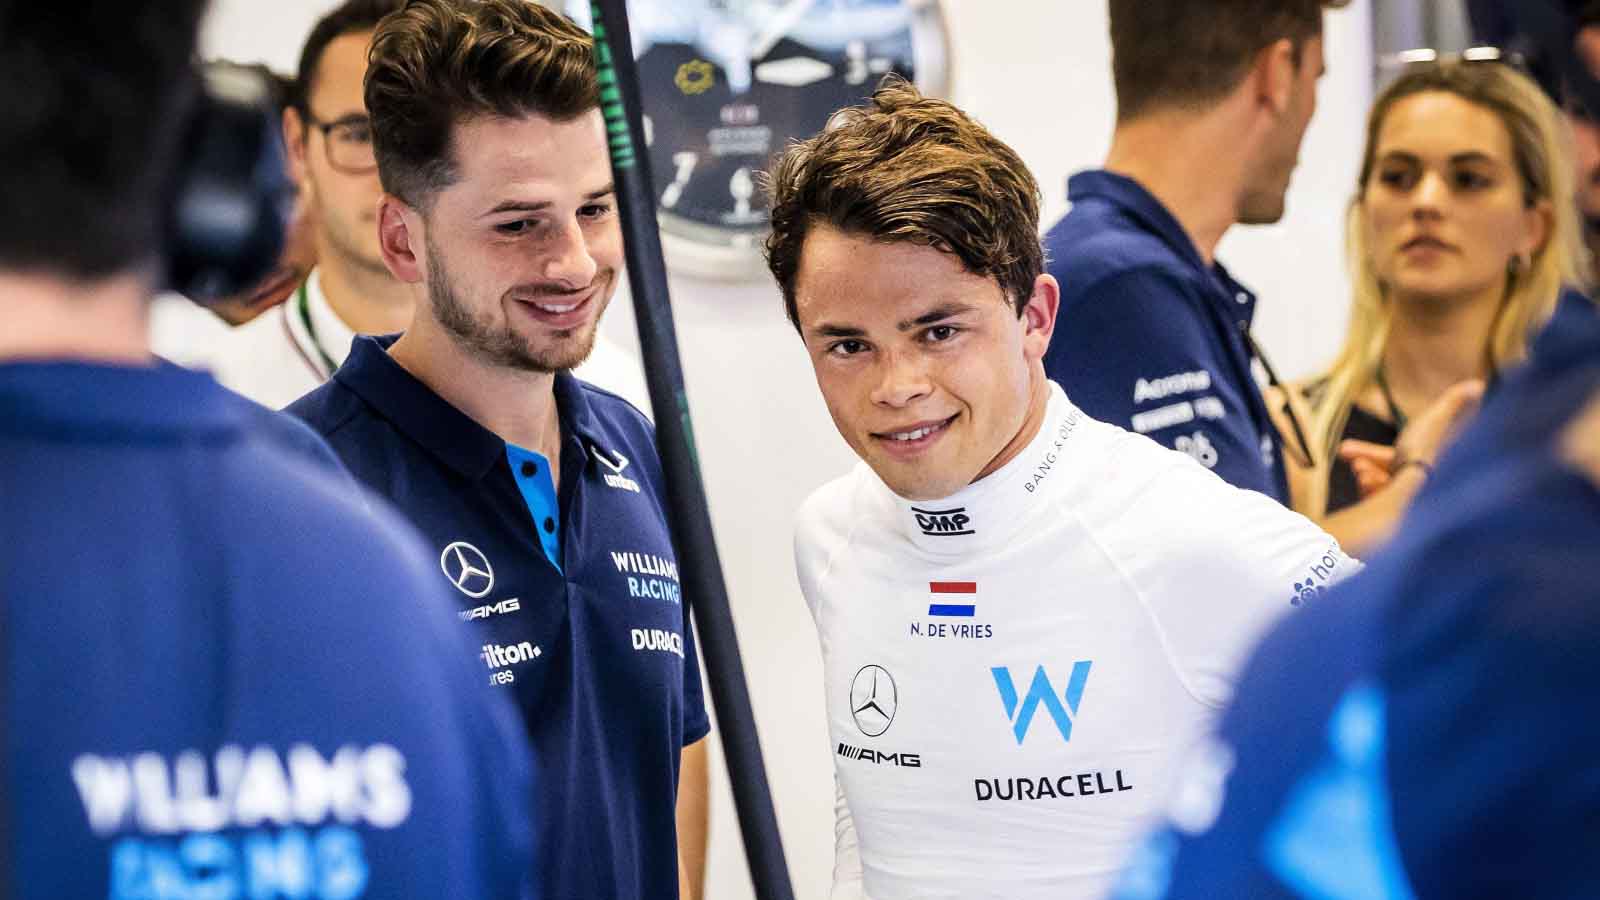 Nyck de Vries in the Williams garage. Spain May 2022.